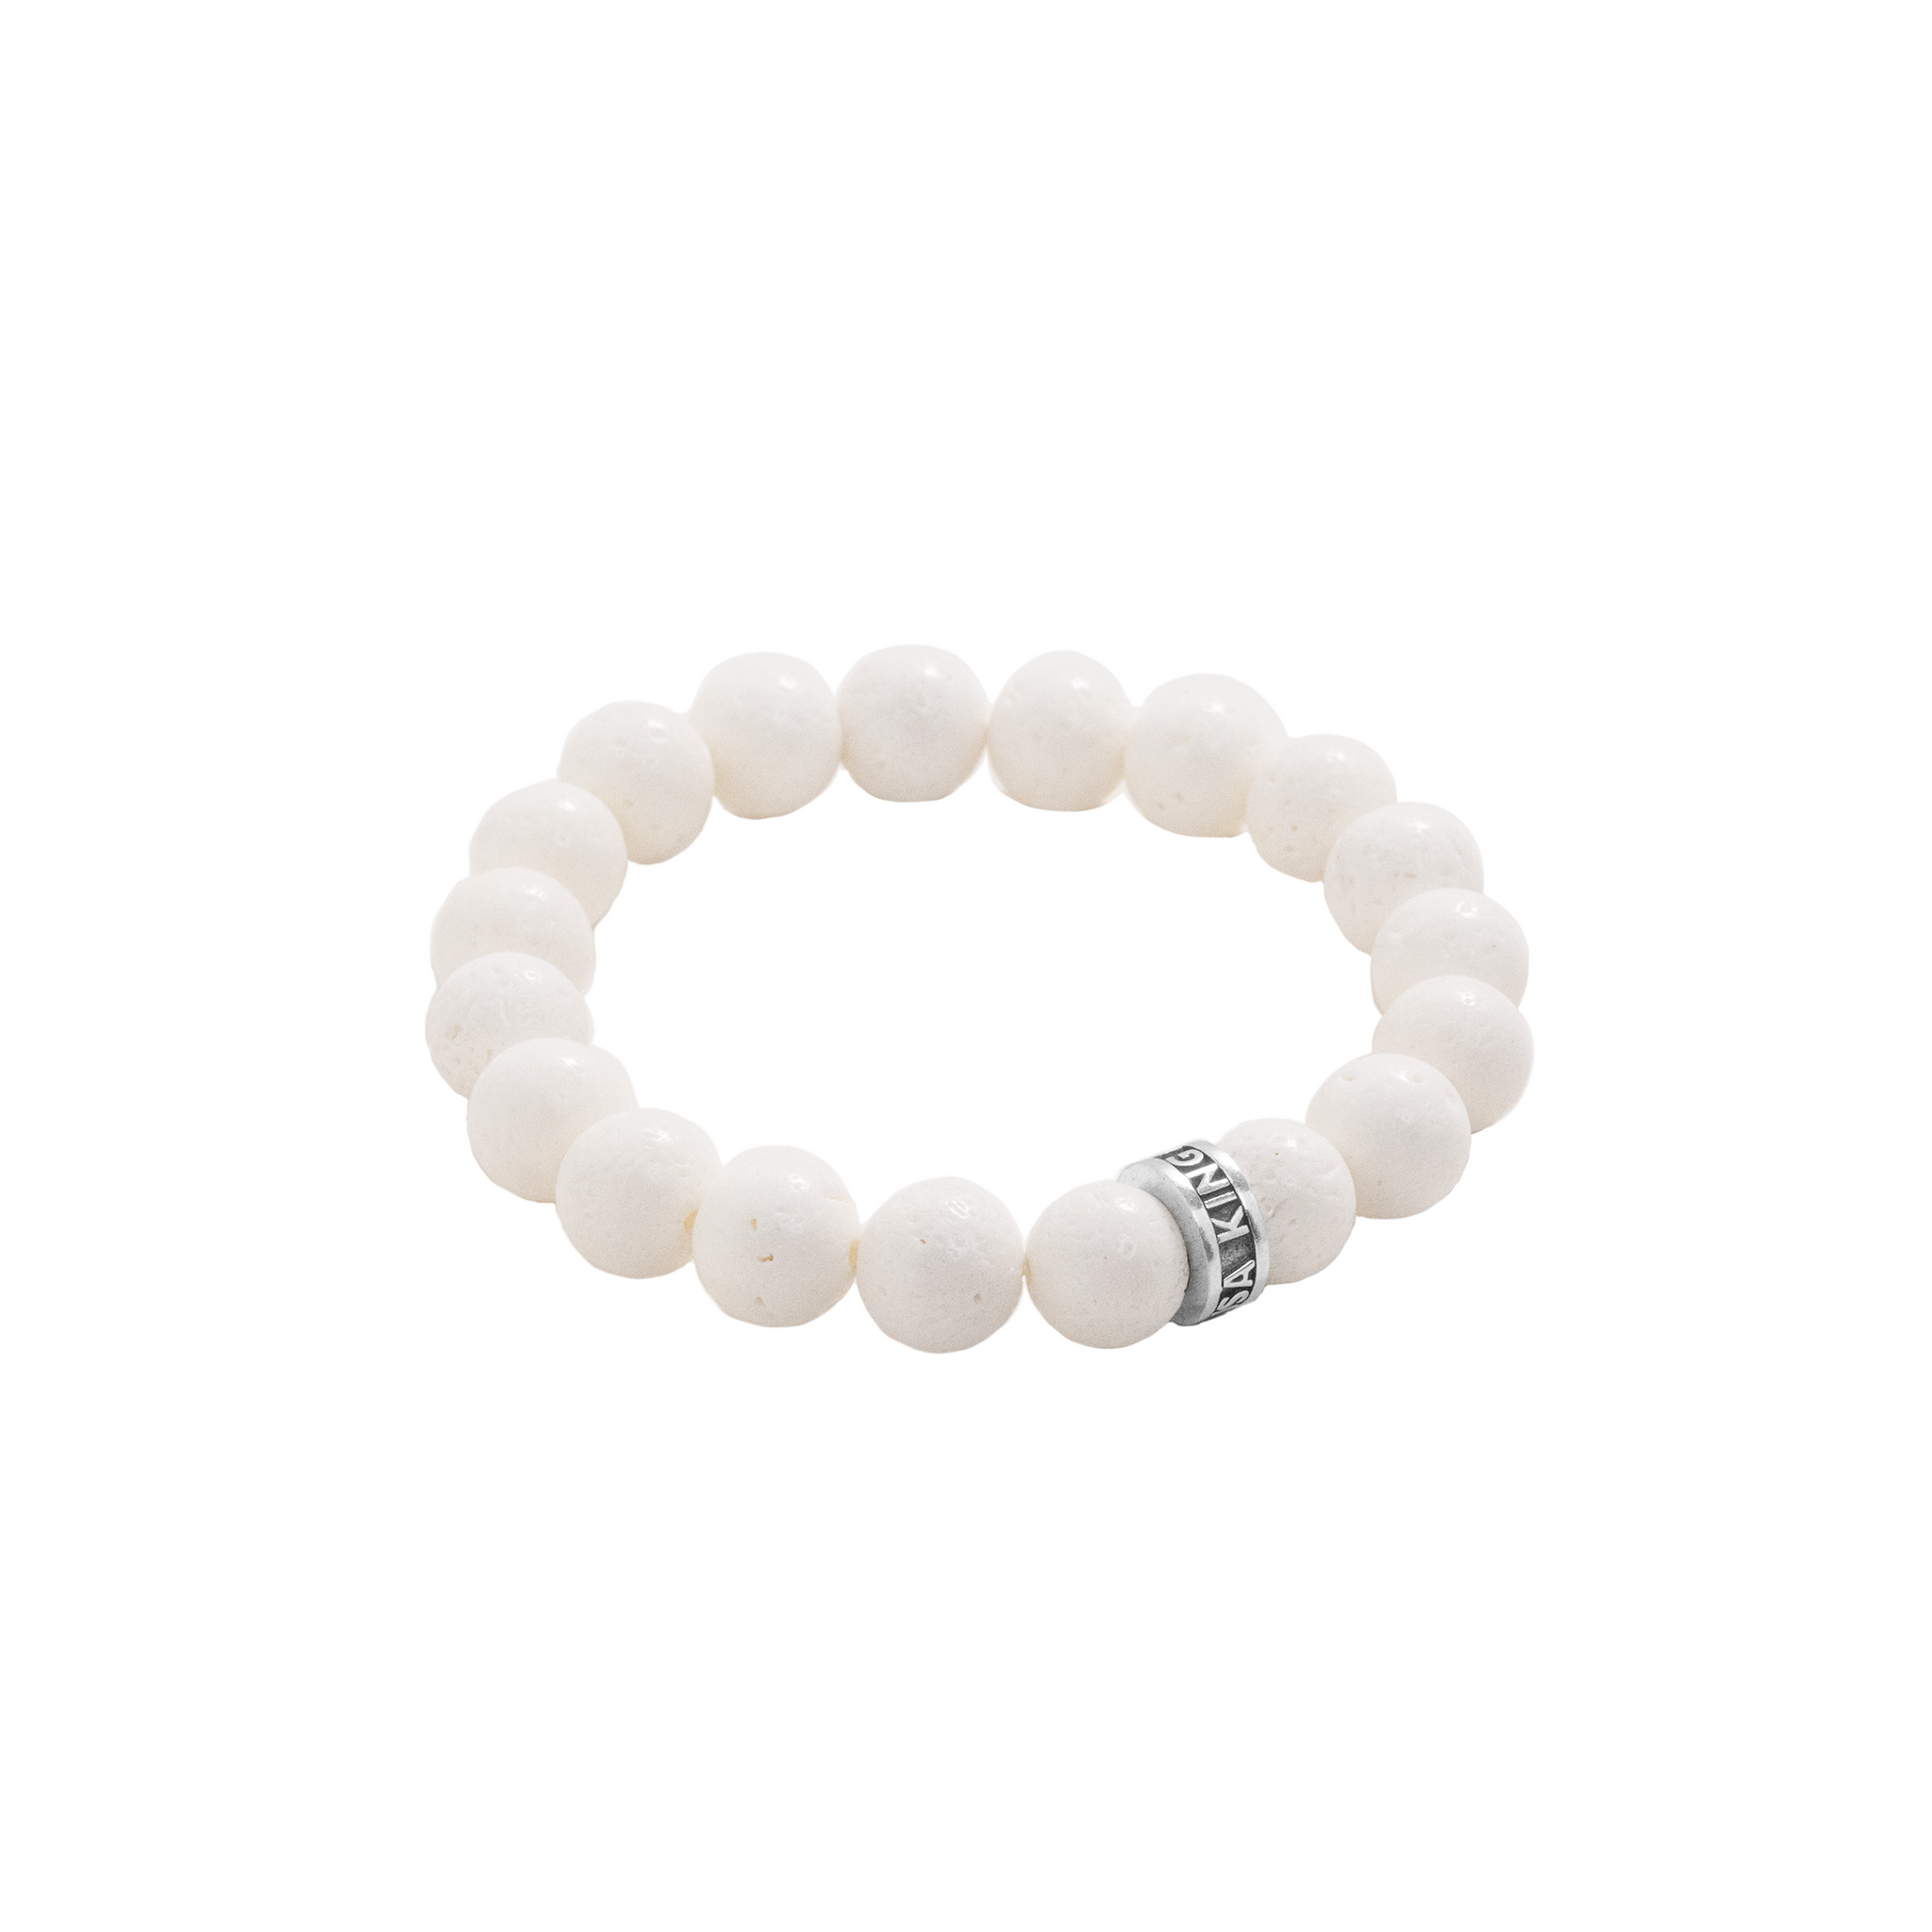 10mm White Coral Beaded Bracelet w/ Logo Ring side view